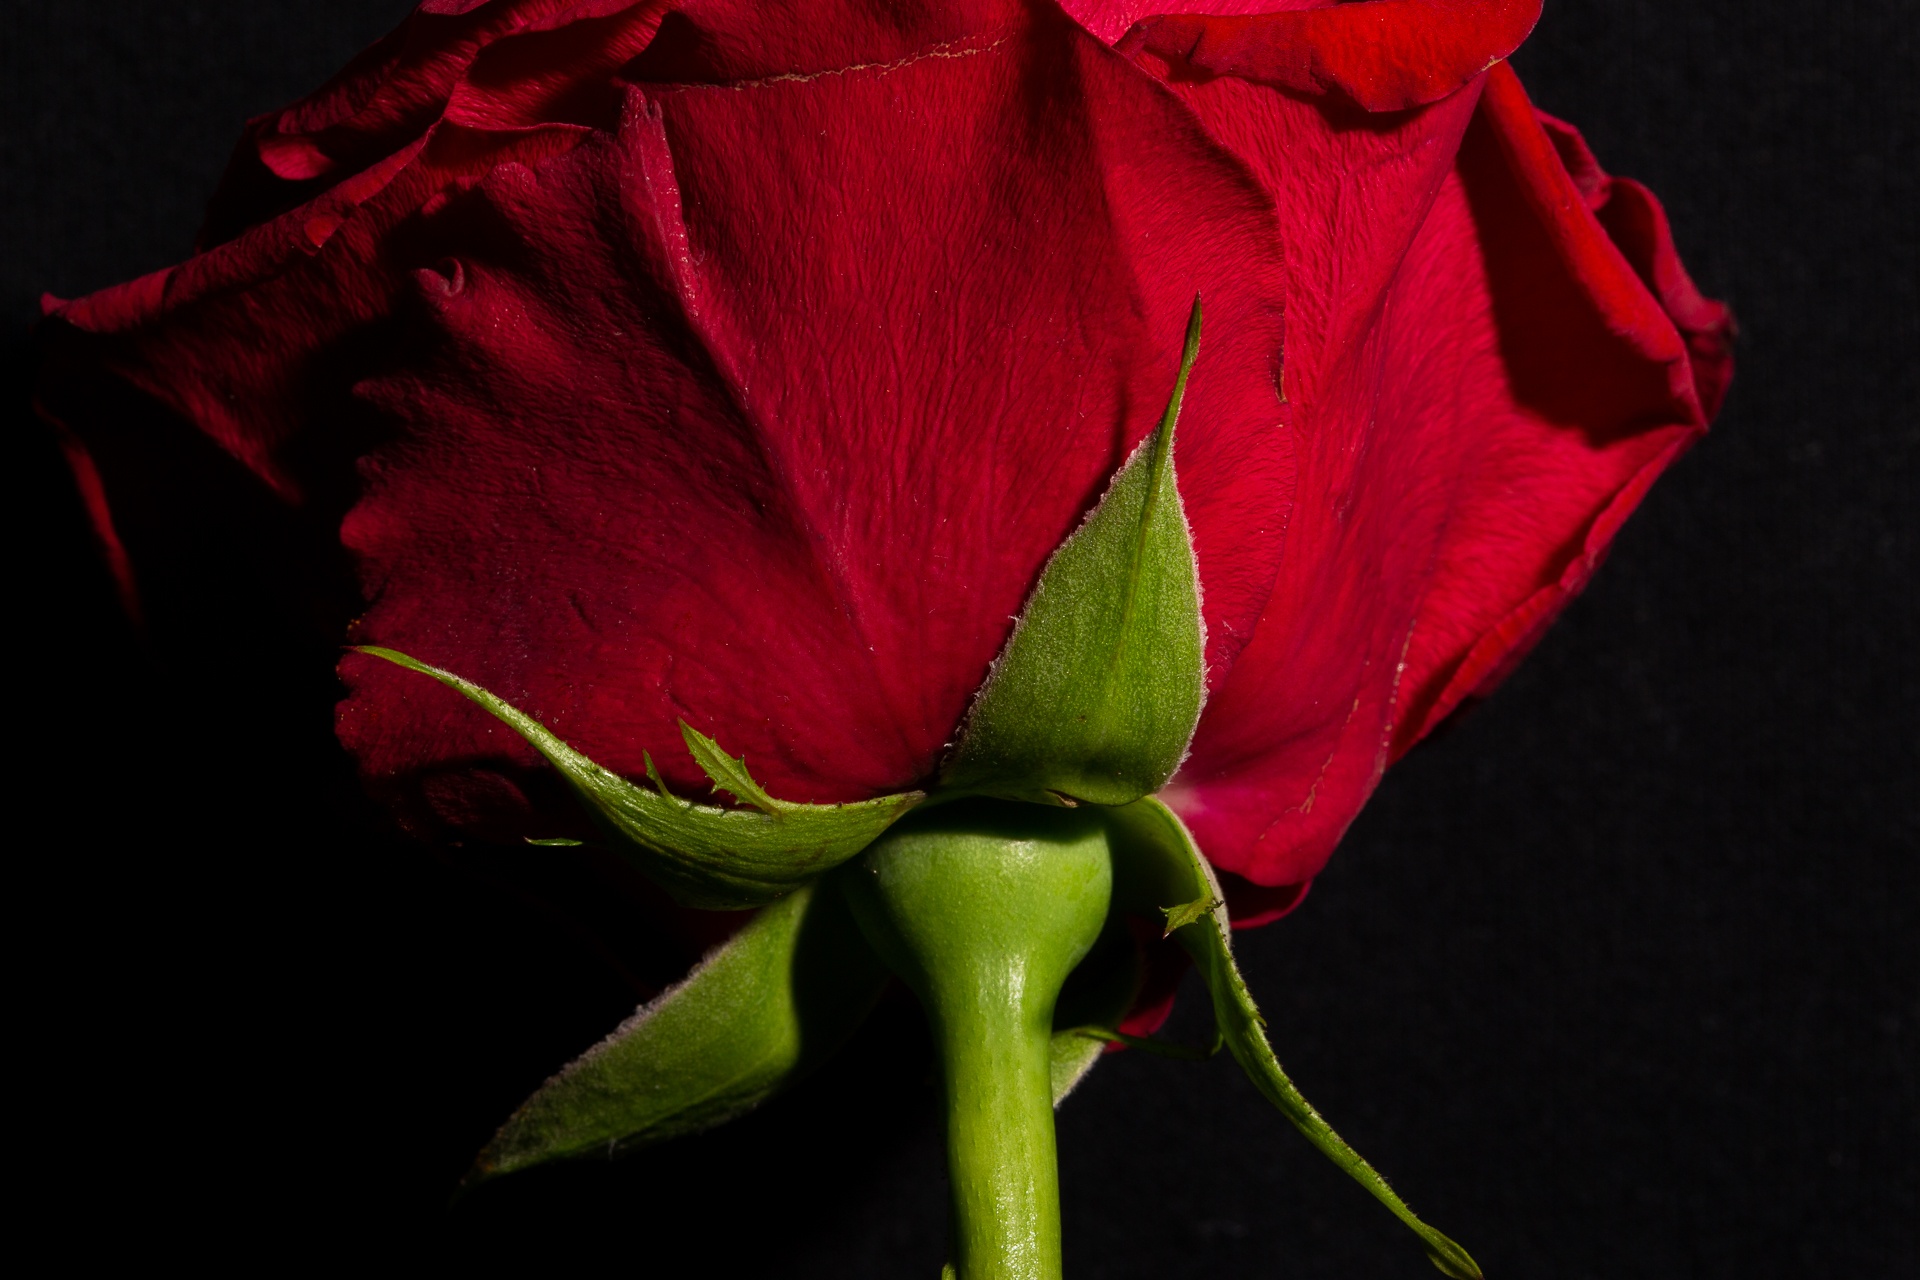 Underside of a red rose